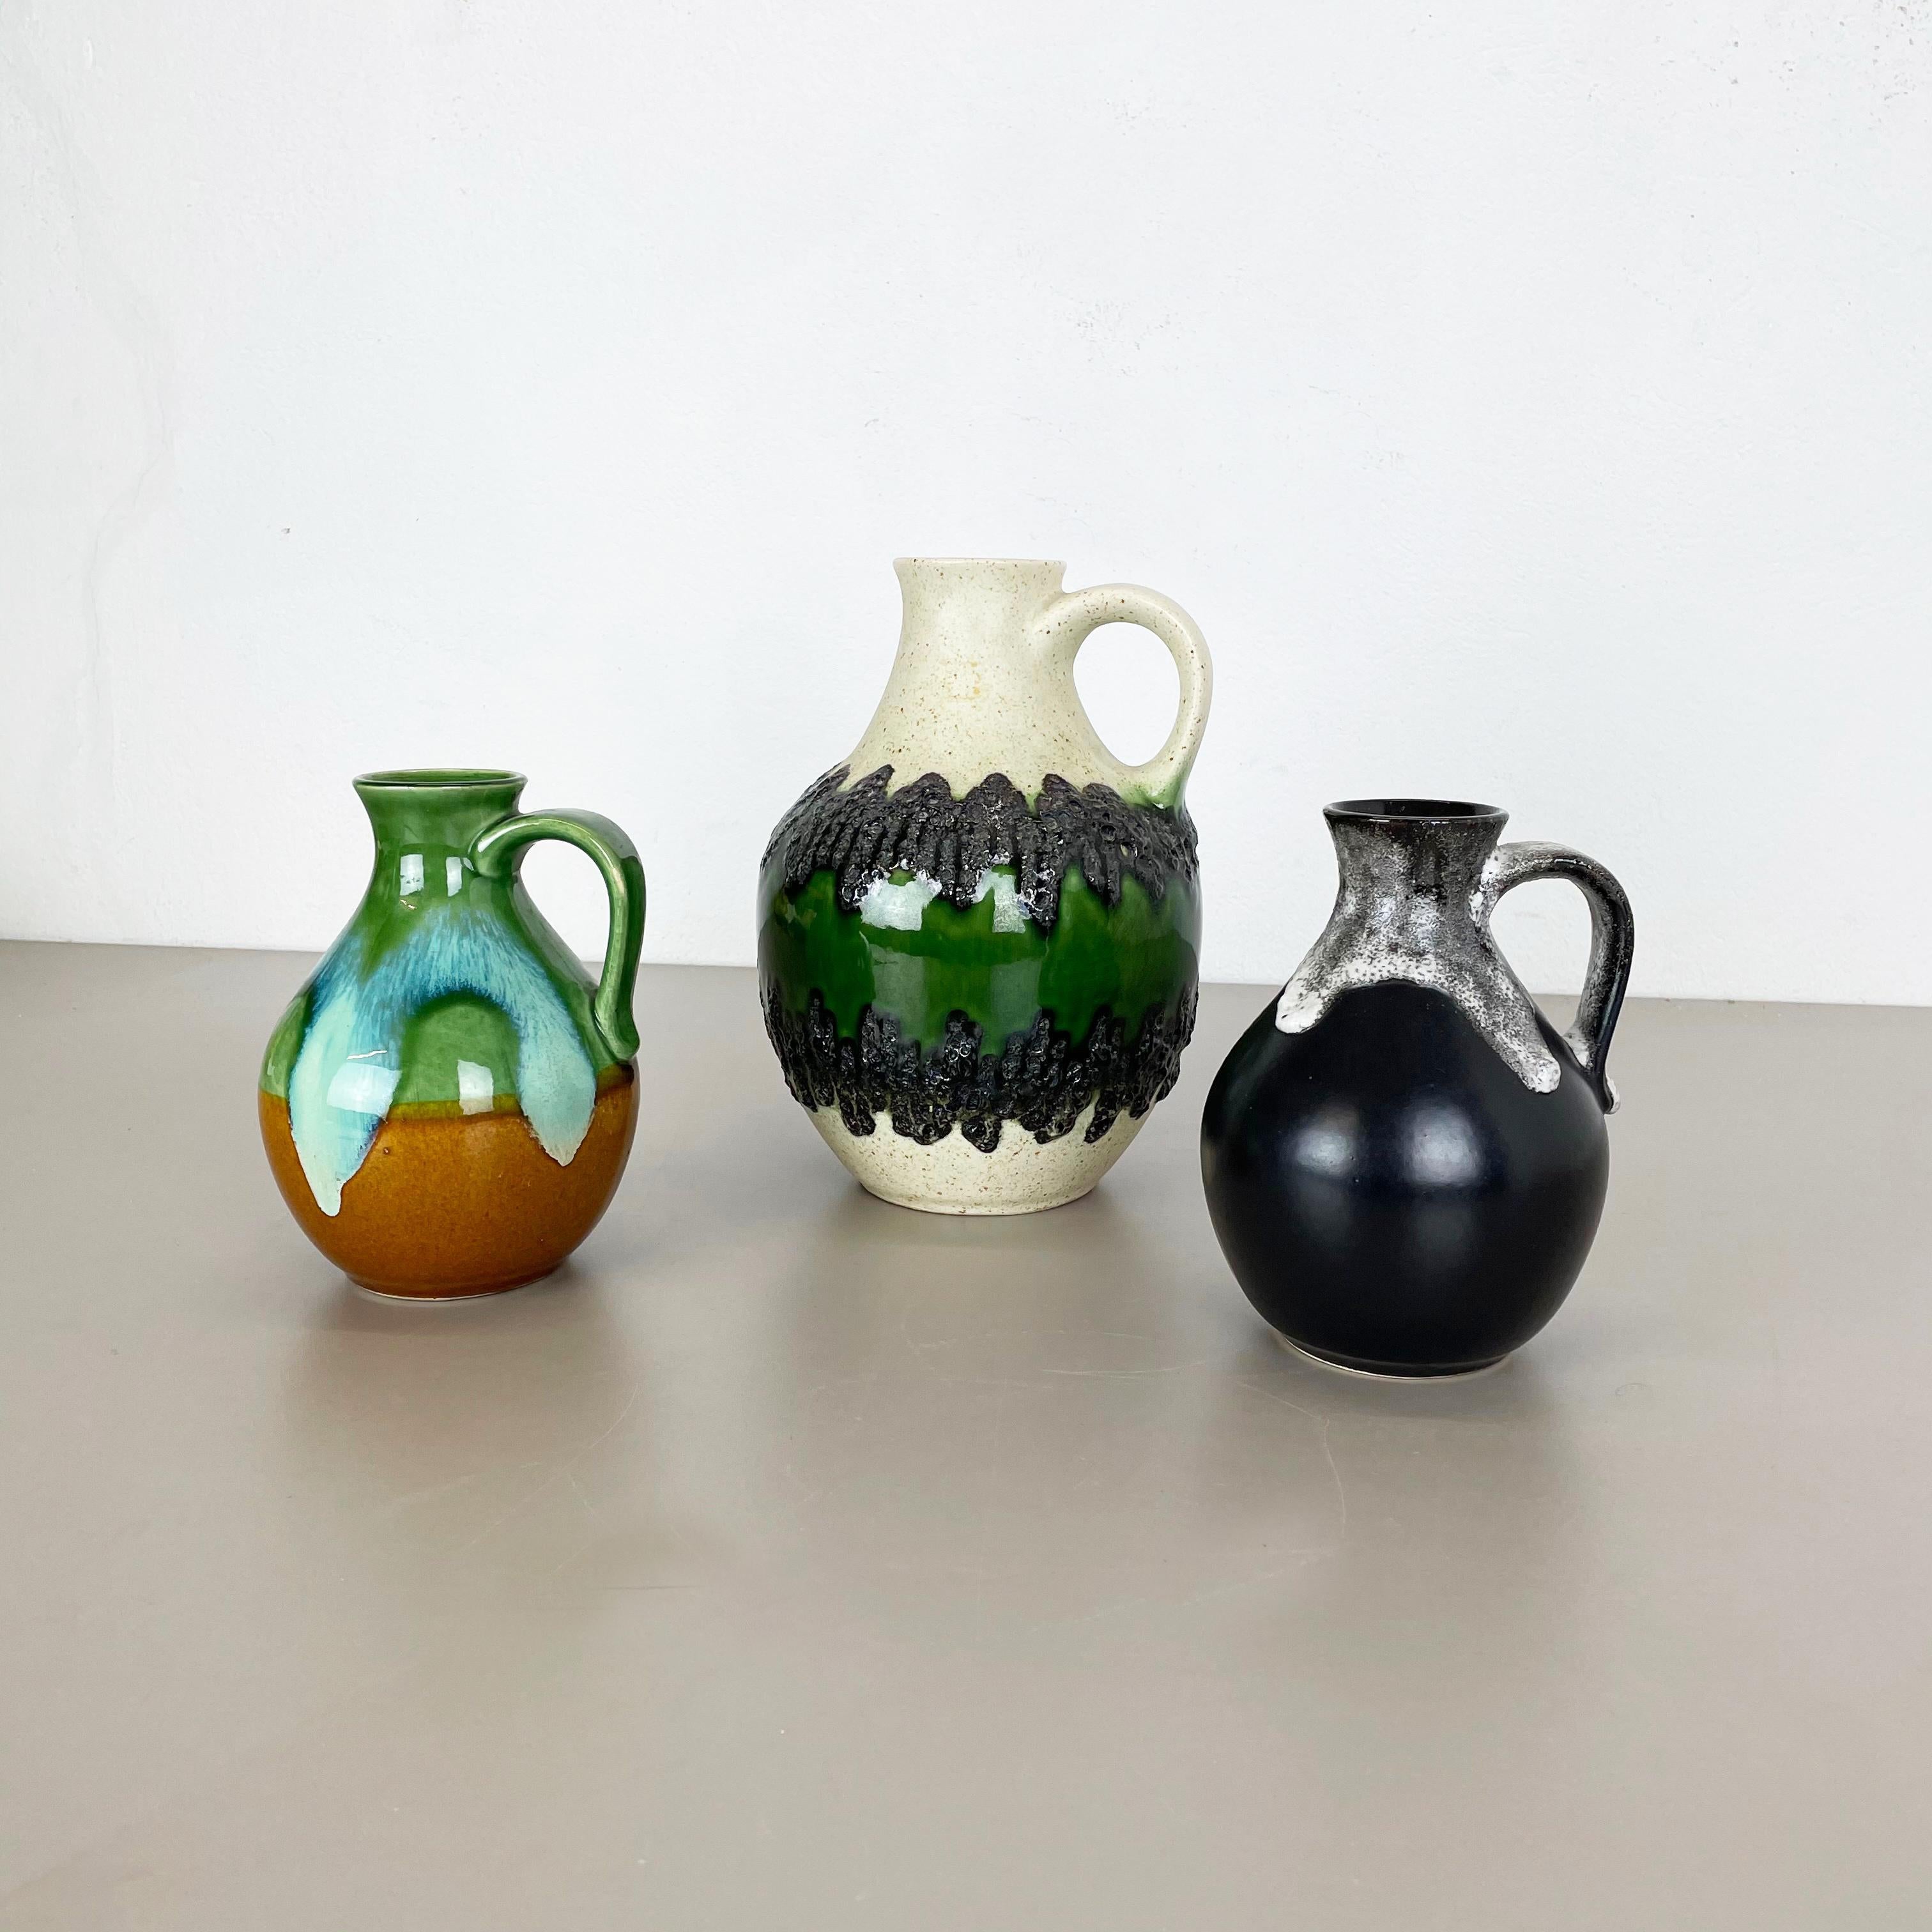 Article:

Pottery ceramic vase set of 2


Producer:

BAY Ceramic, Germany


Decade:

1970s



Description:

Set of 3 original vintage 1960s pottery ceramic vase made in Germany. High quality German production with a nice abstract